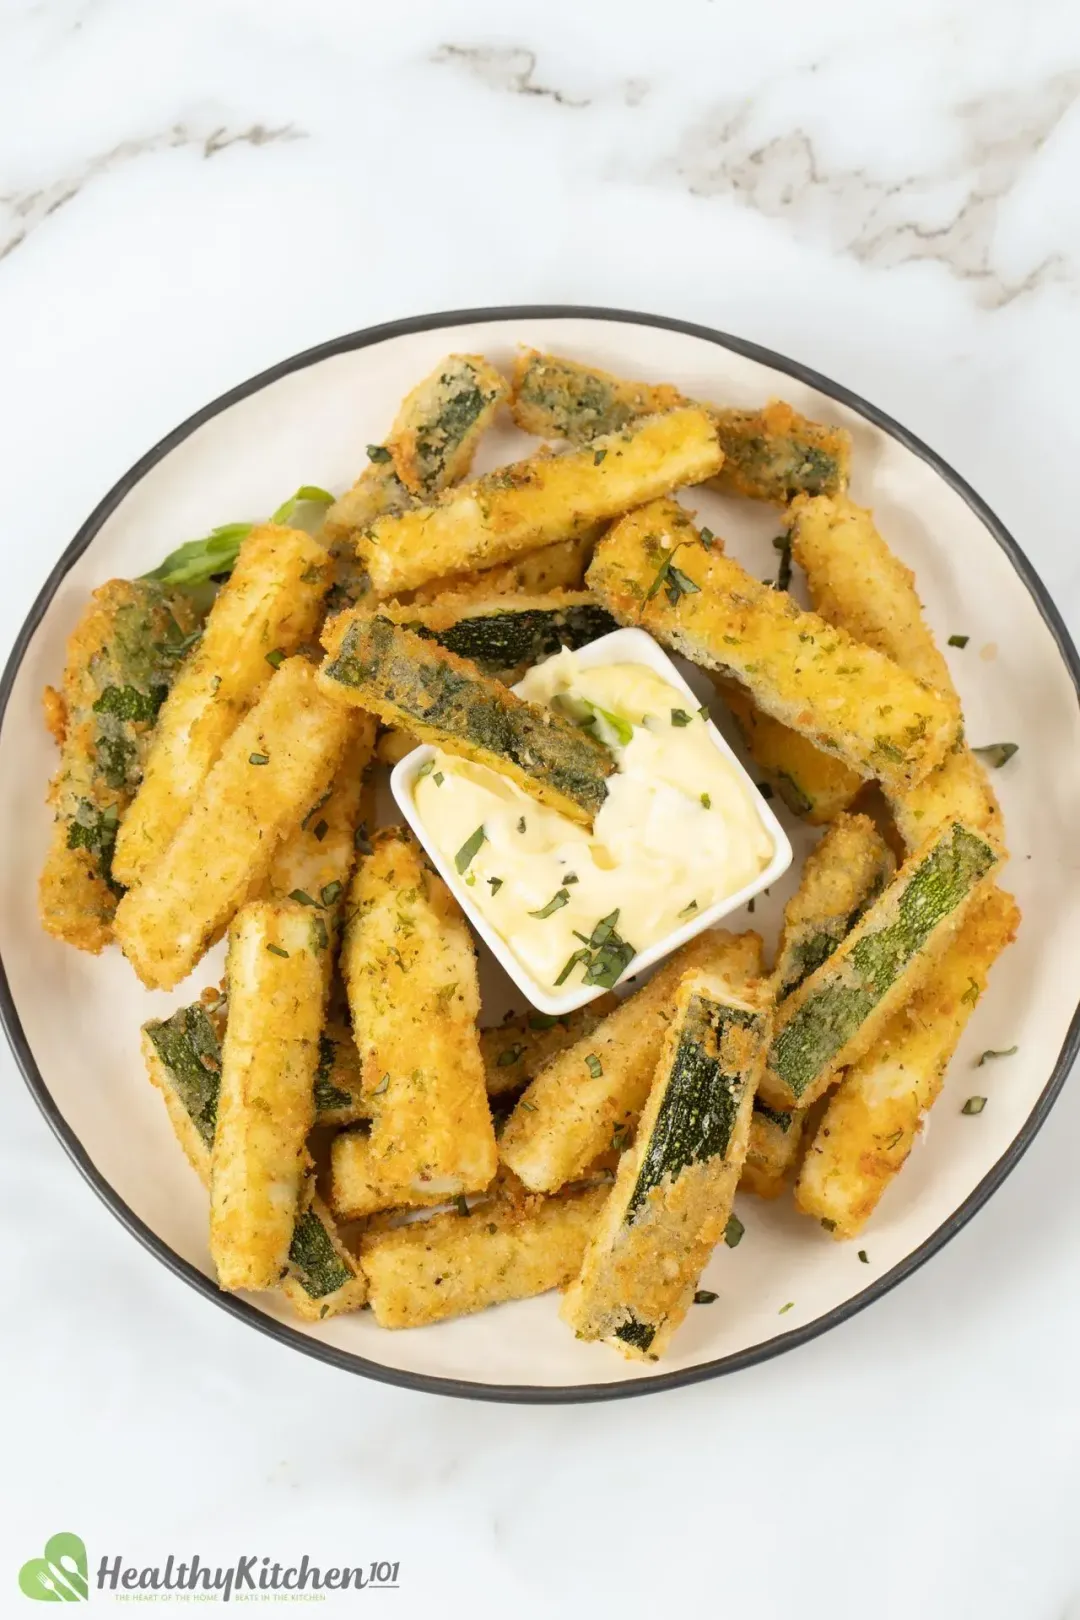 A plate full of deep-fried zucchini fries topped with herbs, surrounding a mayo dip